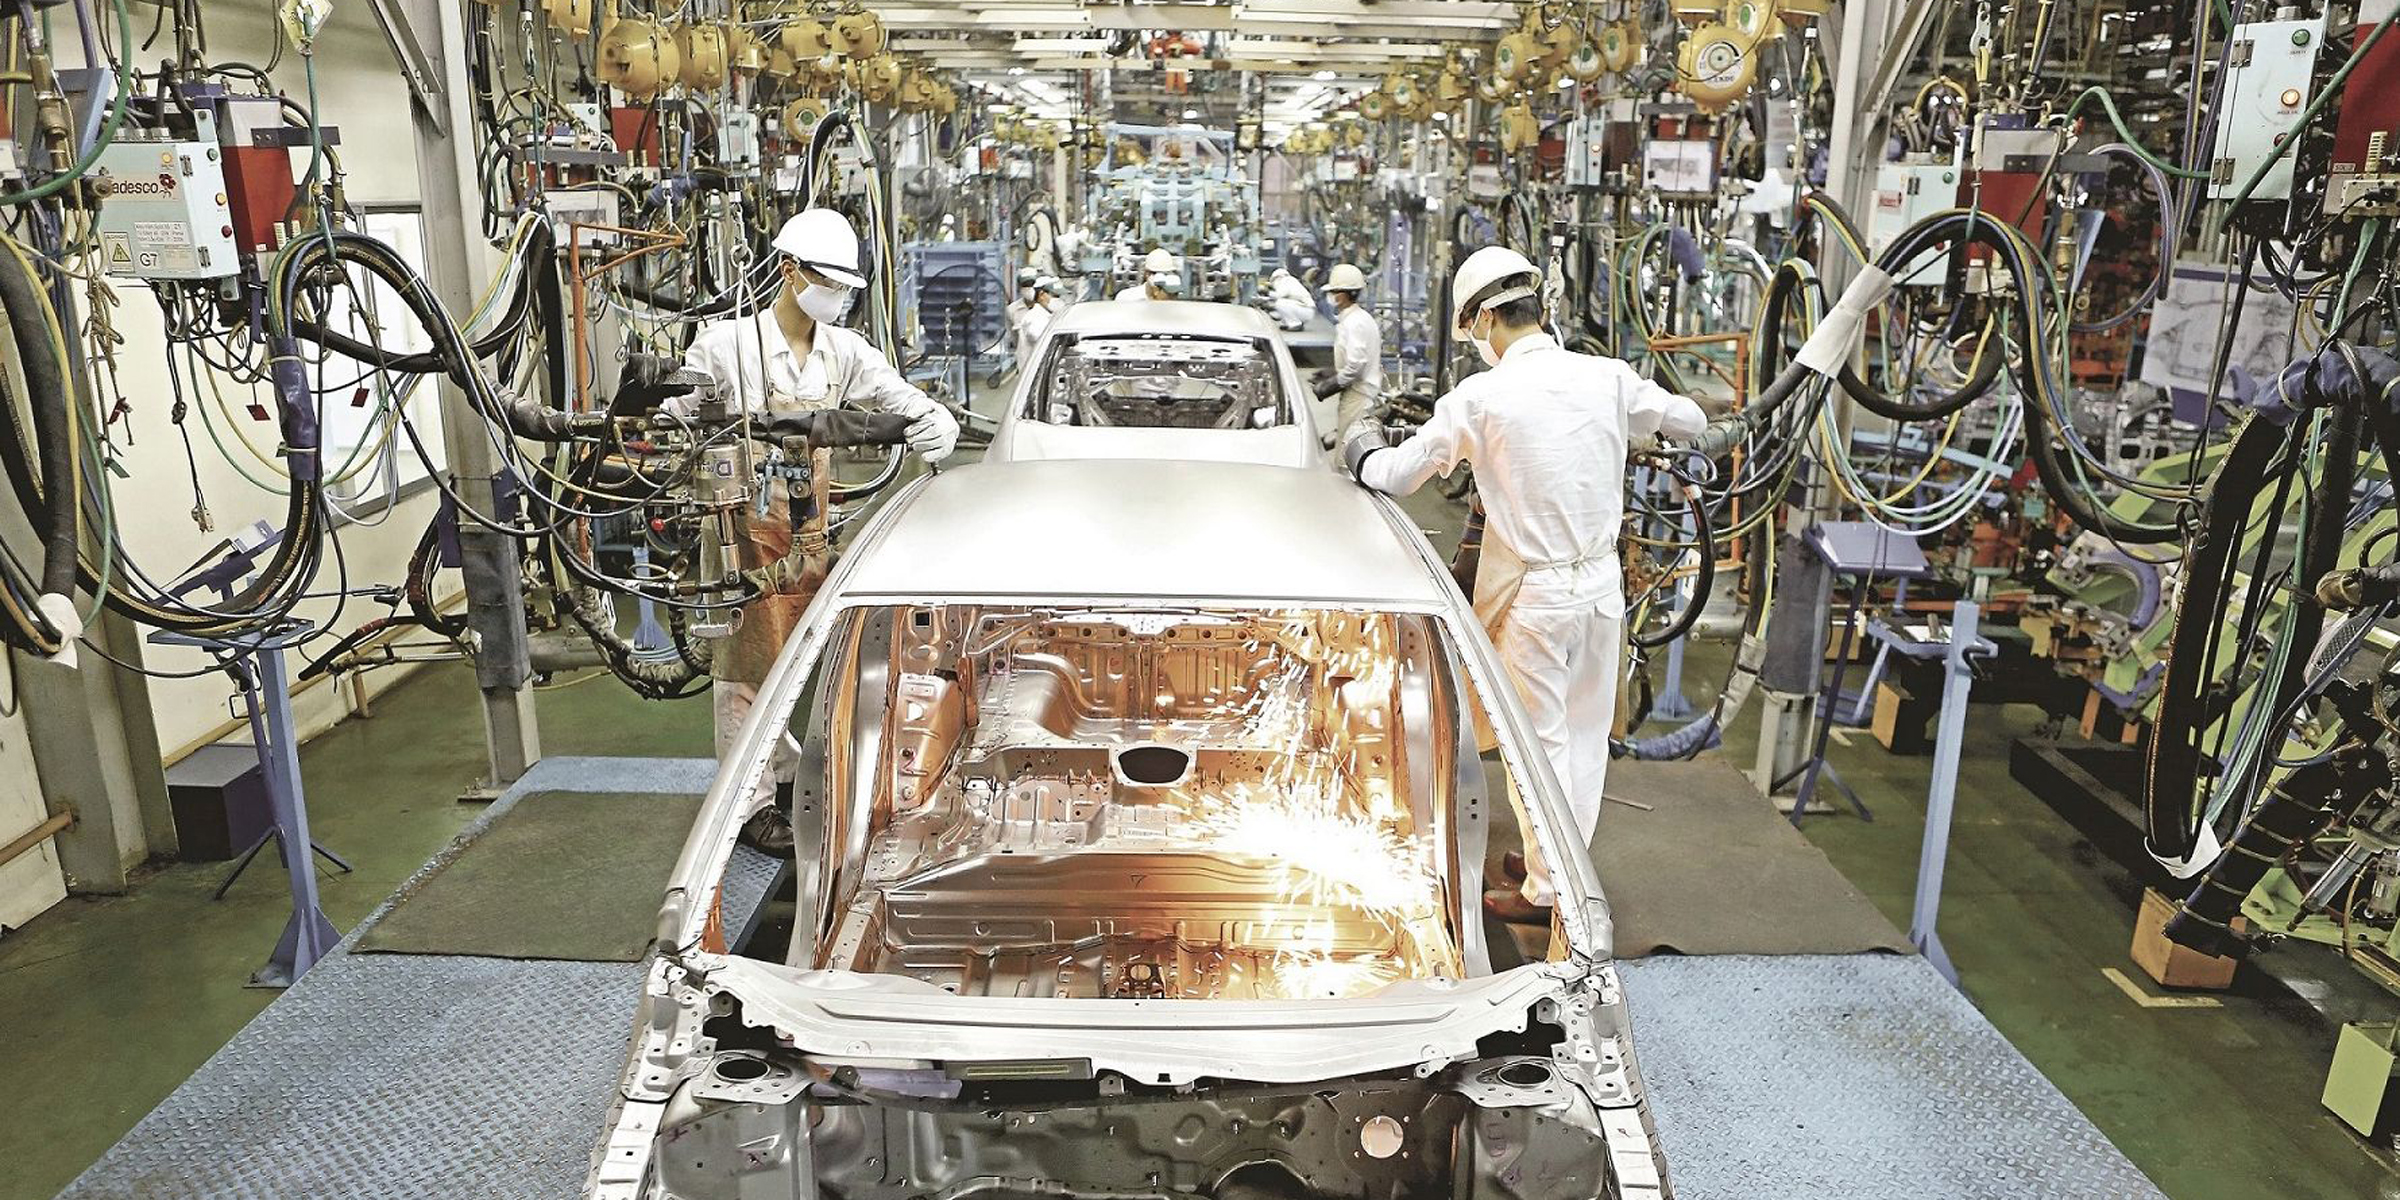 JAMA Report: Automobile Production, Exports Show Steady Growth